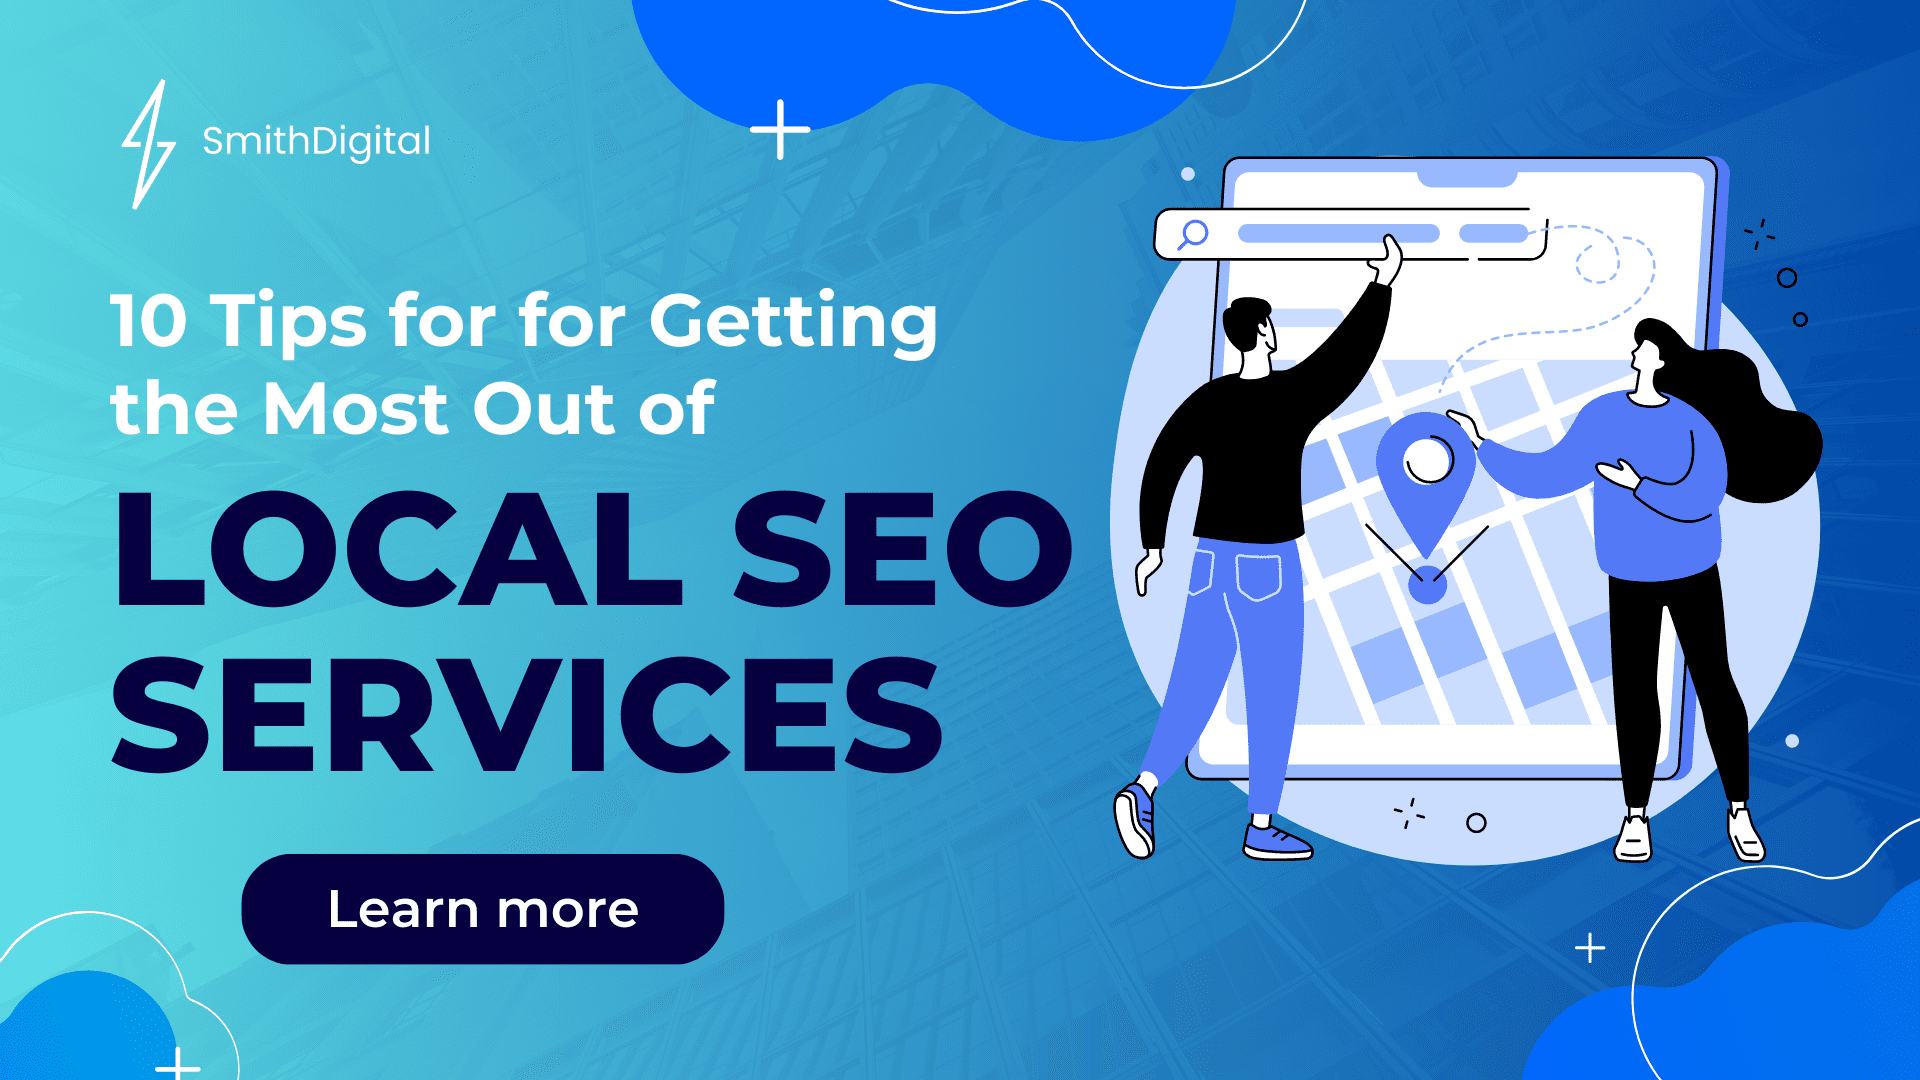 10 Tips for Getting the Most Out of Local SEO Services